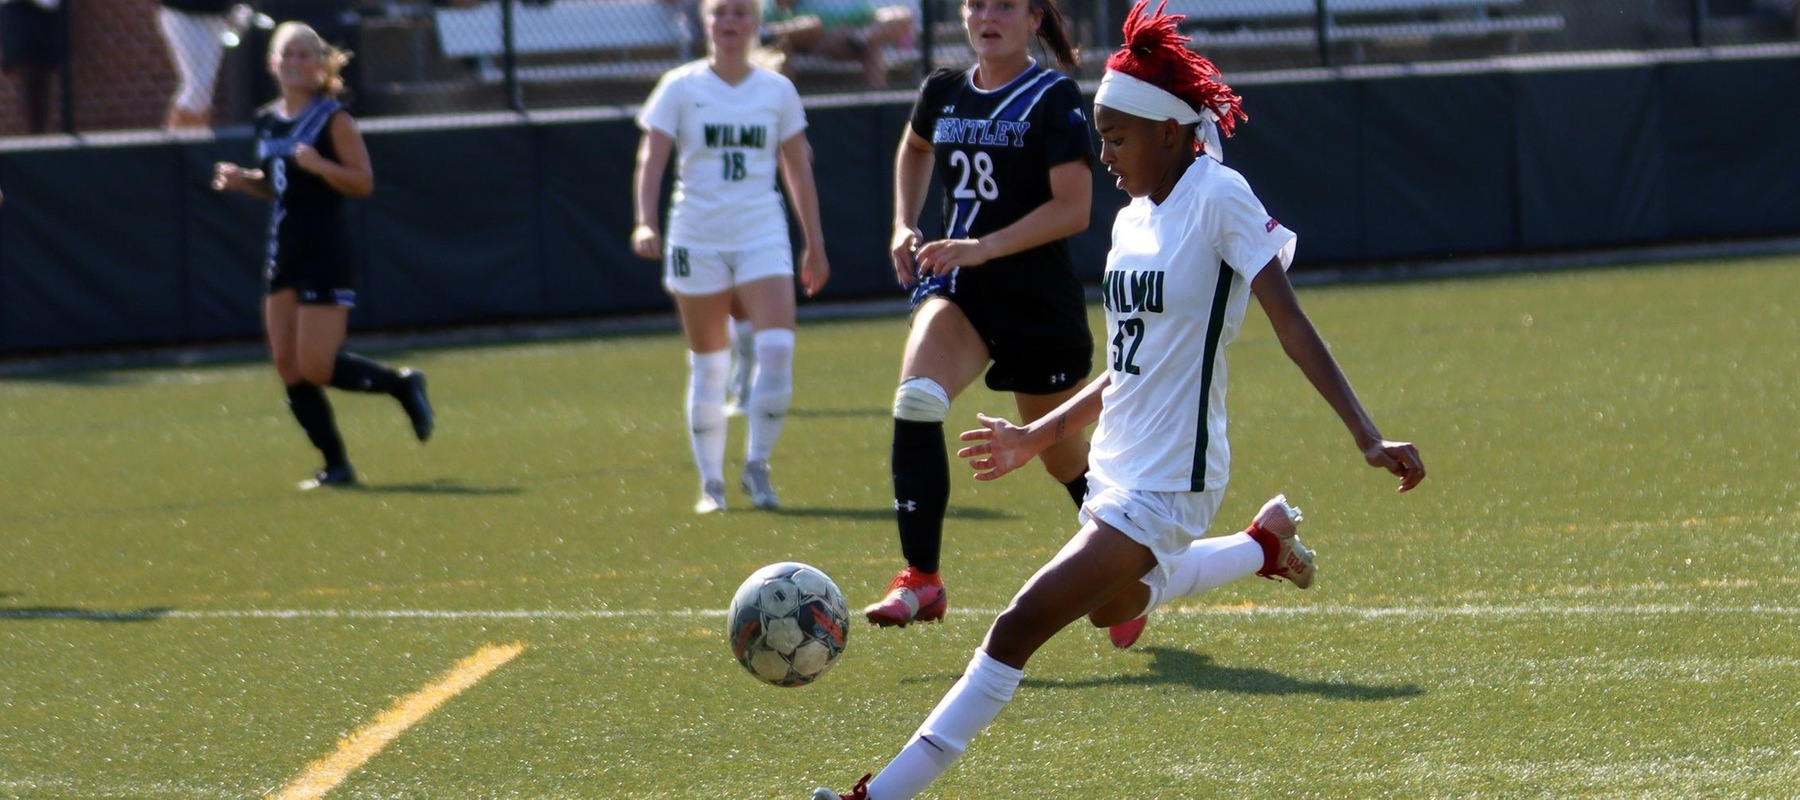 File photo of Jhanae Colston who scored the game-winner in the 81st minute at Molloy. Copyright 2022; Wilmington University. All rights reserved. Photo by Dan Lauletta.